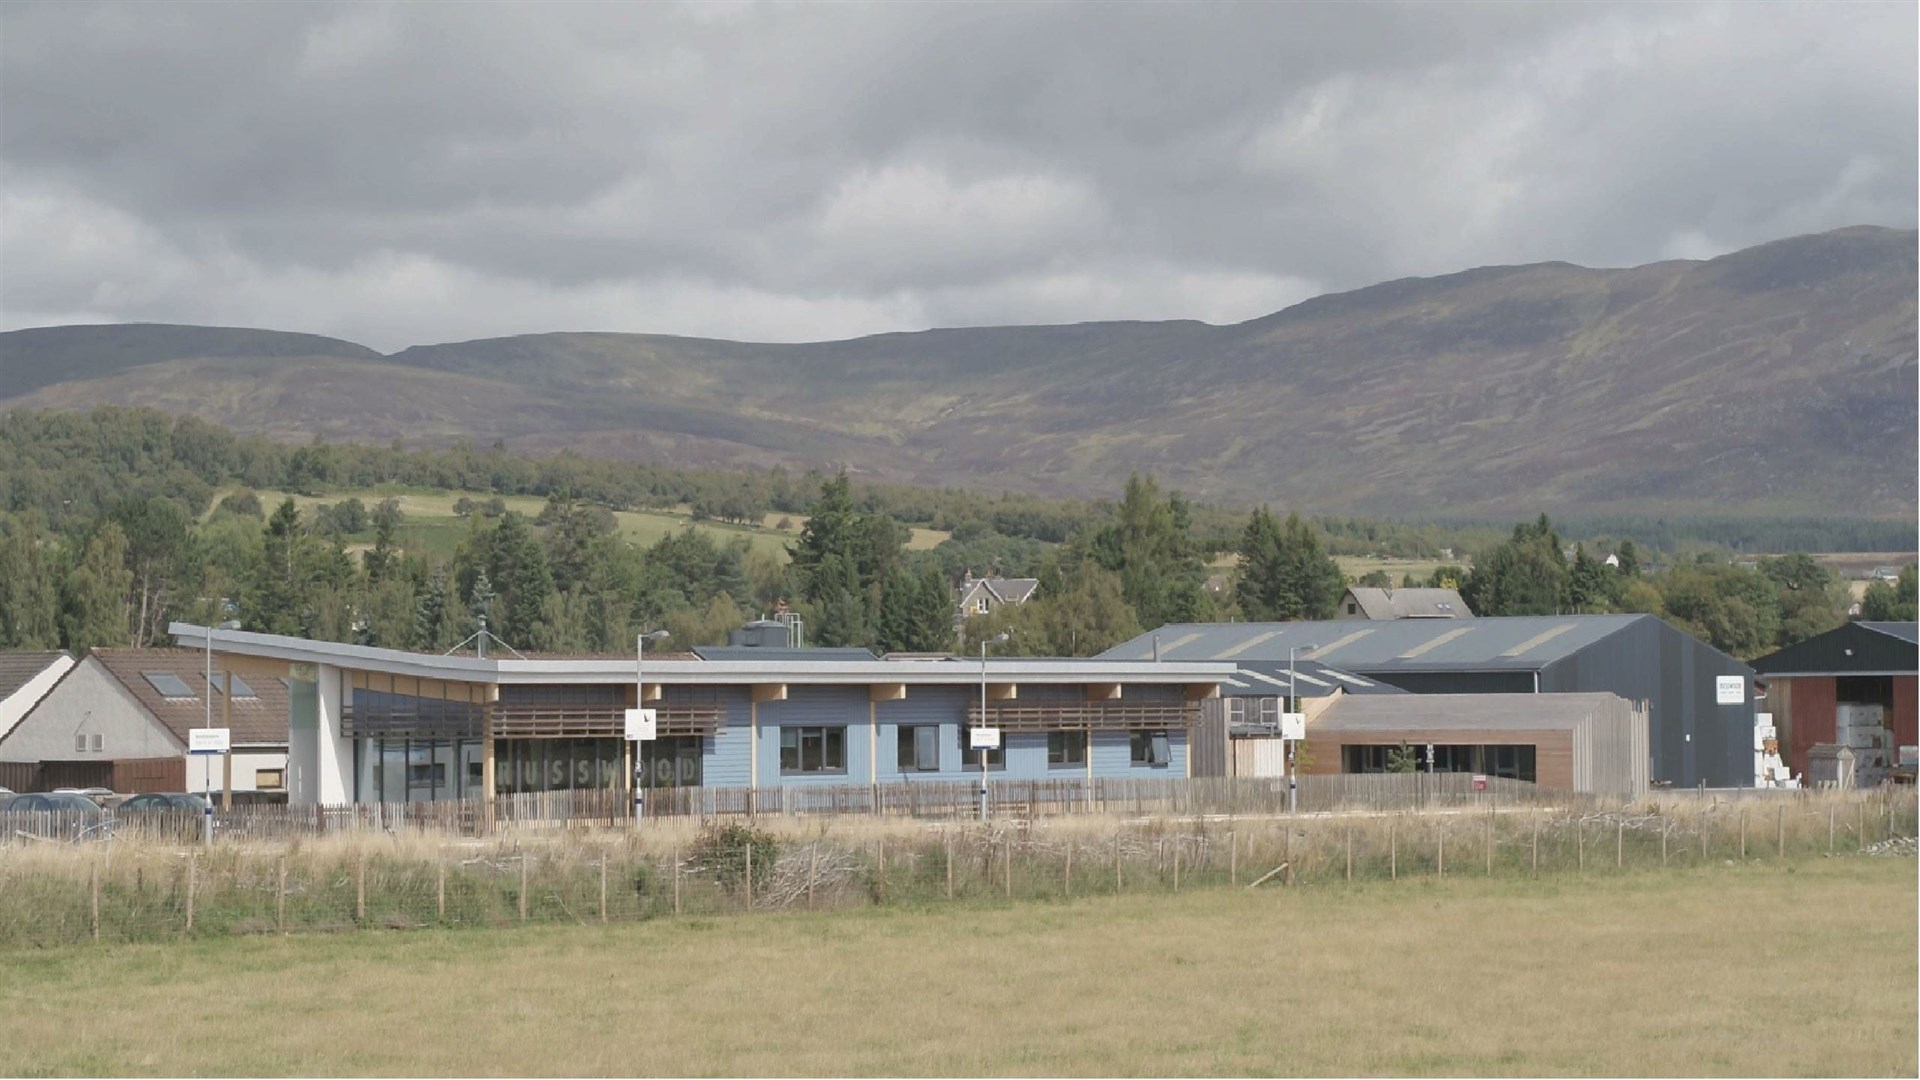 Newtonmore: the line passes by Russwood Ltd, where Mr Houghton worked before retiring.